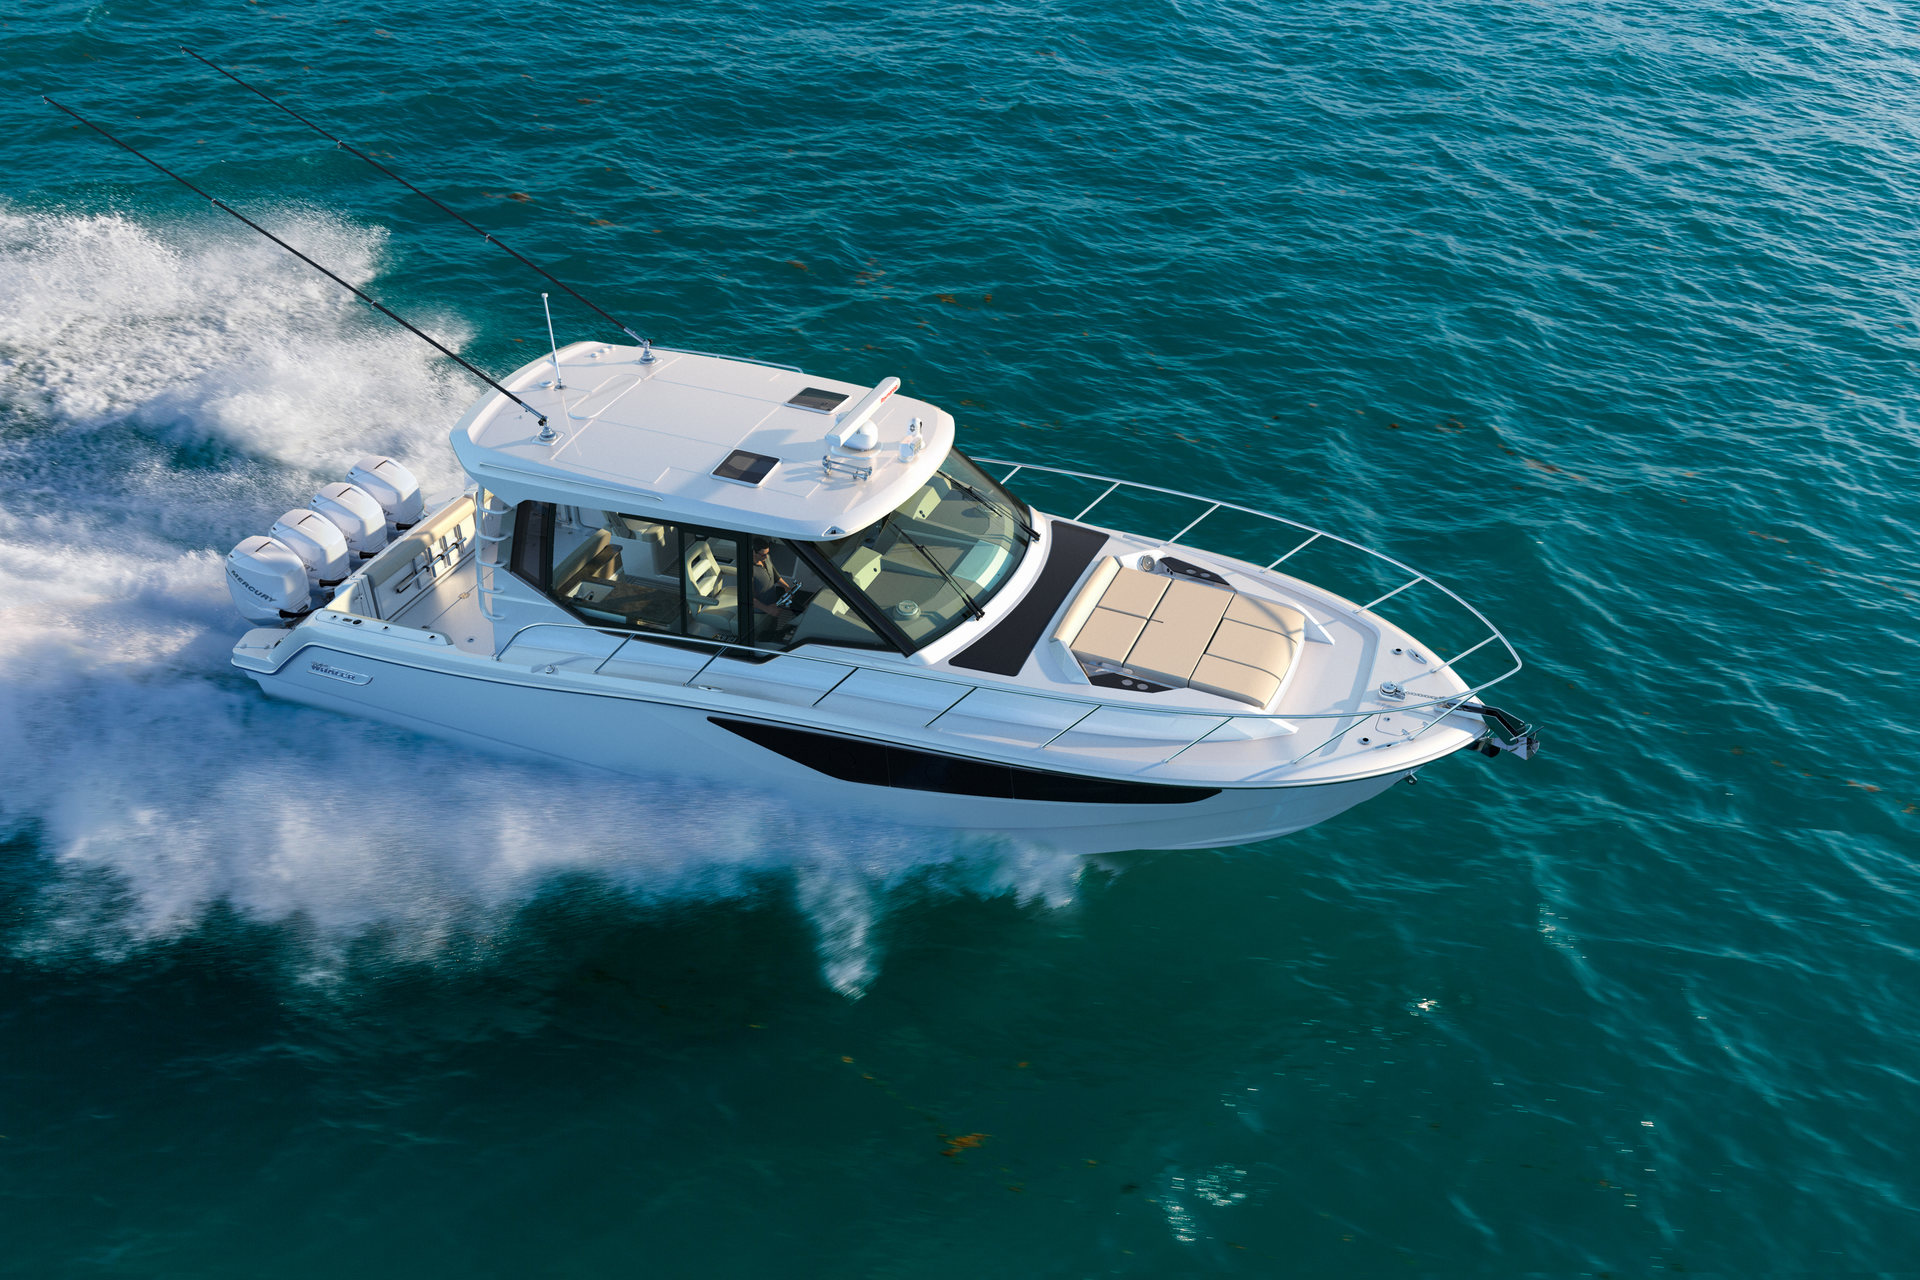 360 VR Virtual Tours of the Boston Whaler 405 Conquest